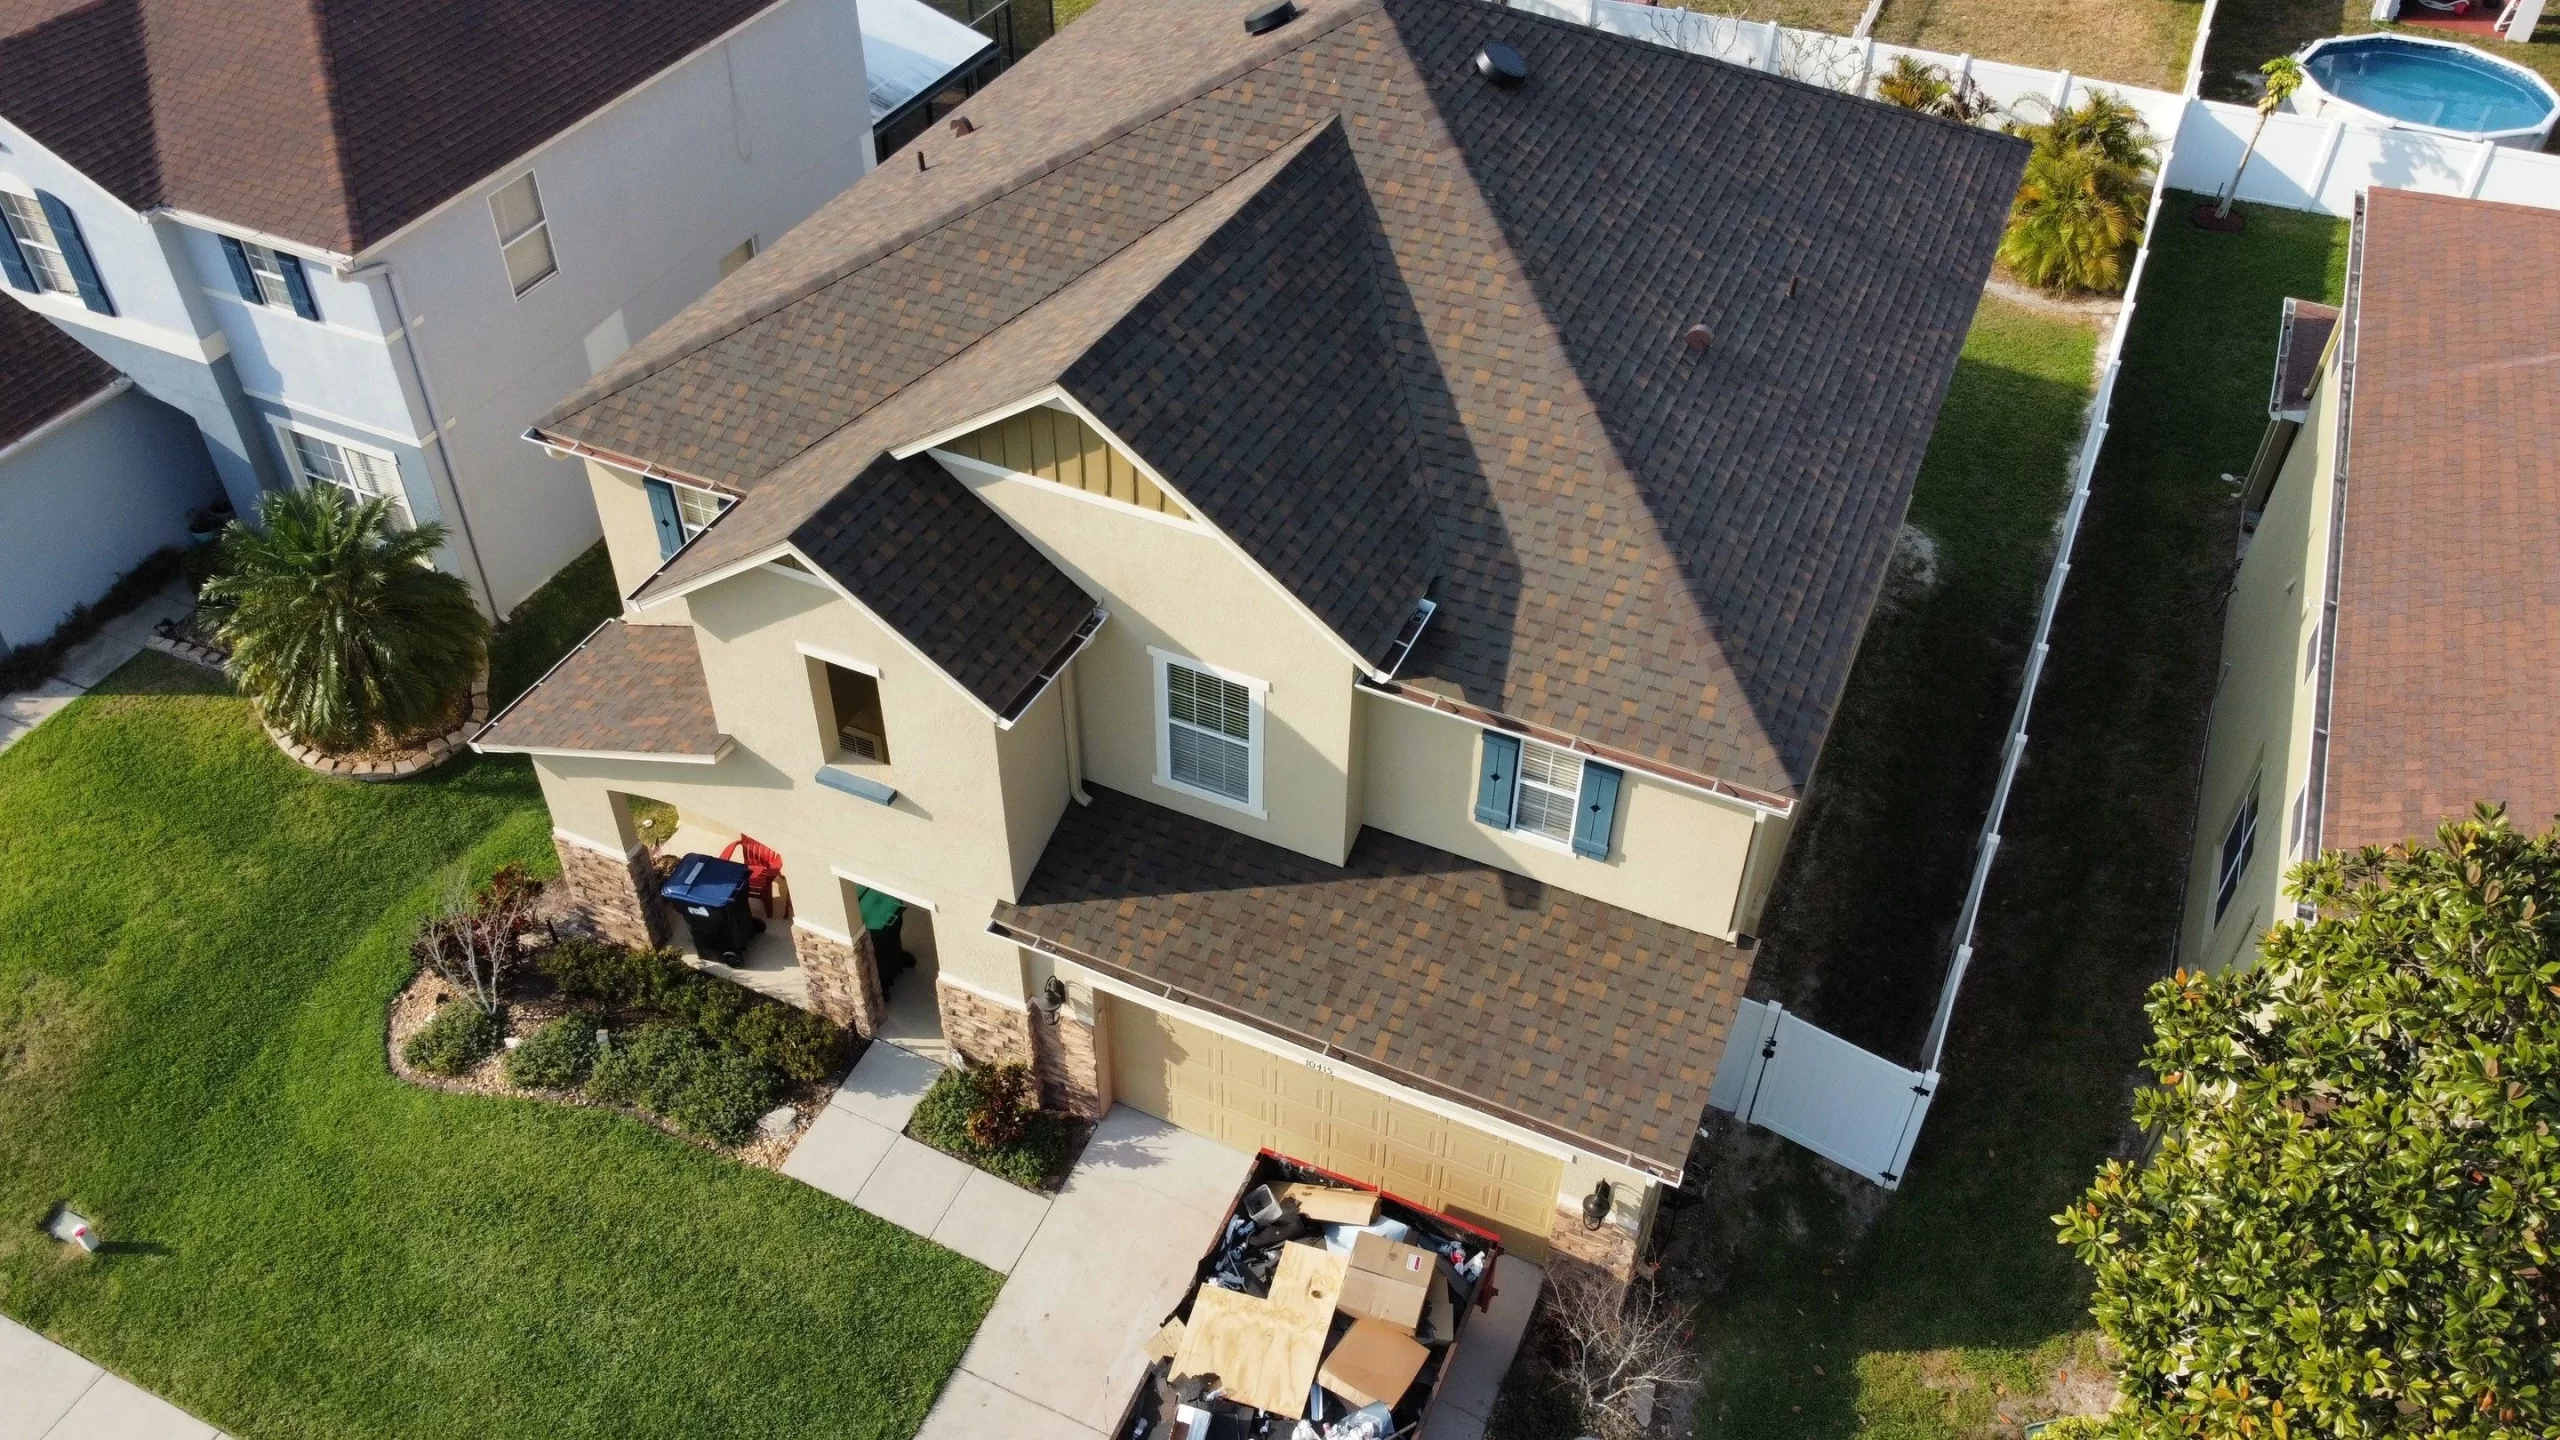 Aerial view of a residential home in Maitland, Florida, featuring a brand new roof installation by Nine Square Roofing, highlighting the precision and quality of the work.